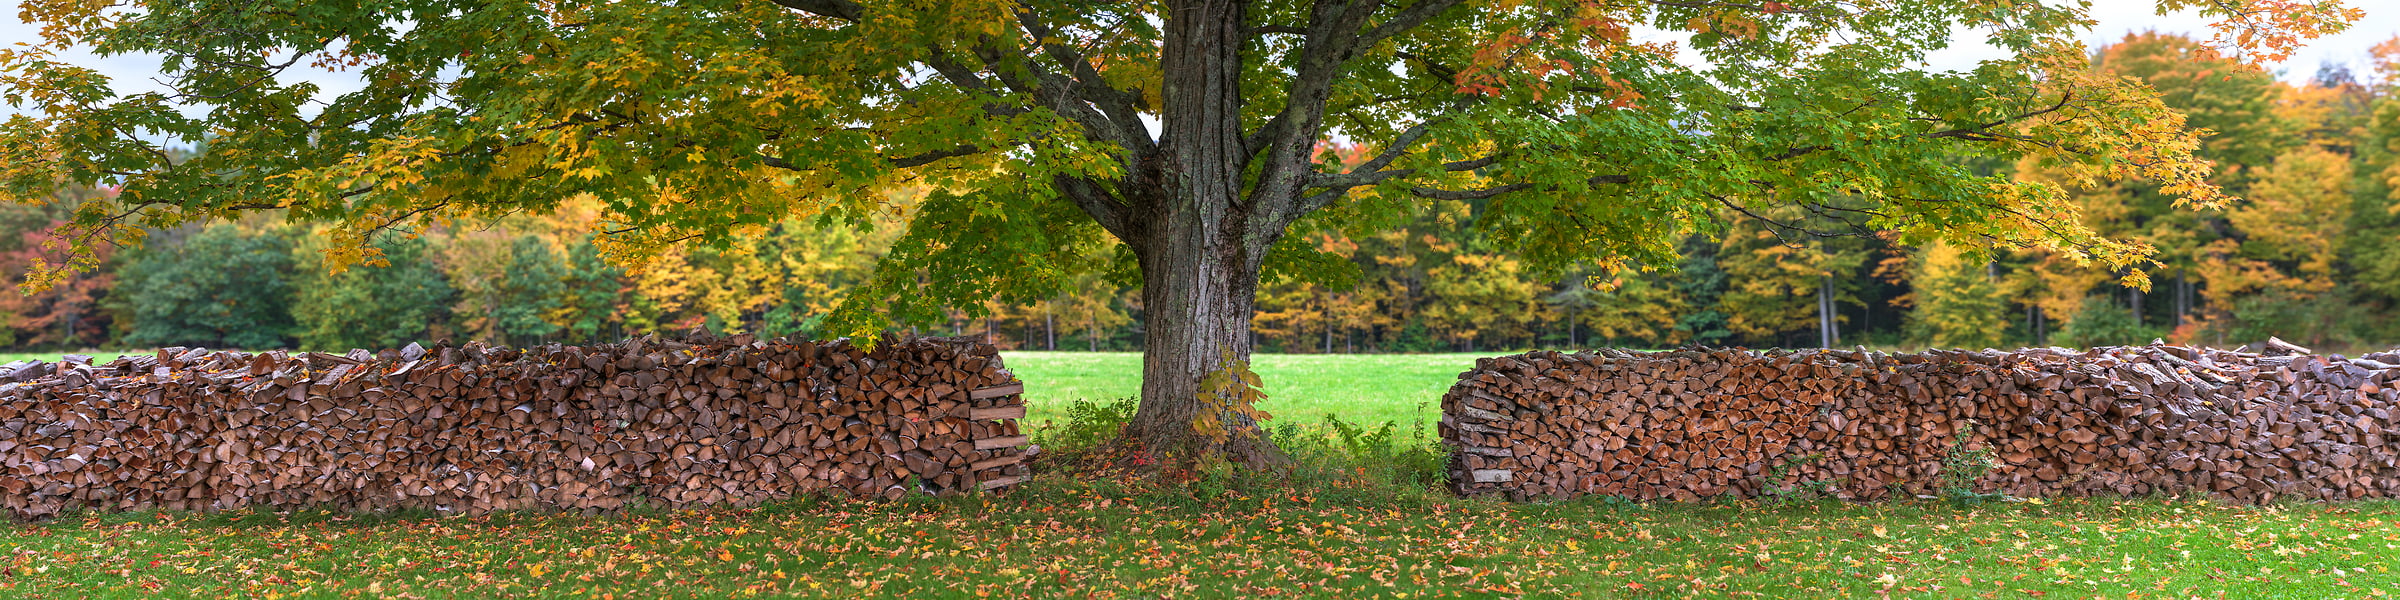 1,425 megapixels! A very high resolution, large-format VAST photo print of a woodpile and a maple tree; photograph created by Aaron Priest in Muster Field Farm, North Sutton, New Hampshire